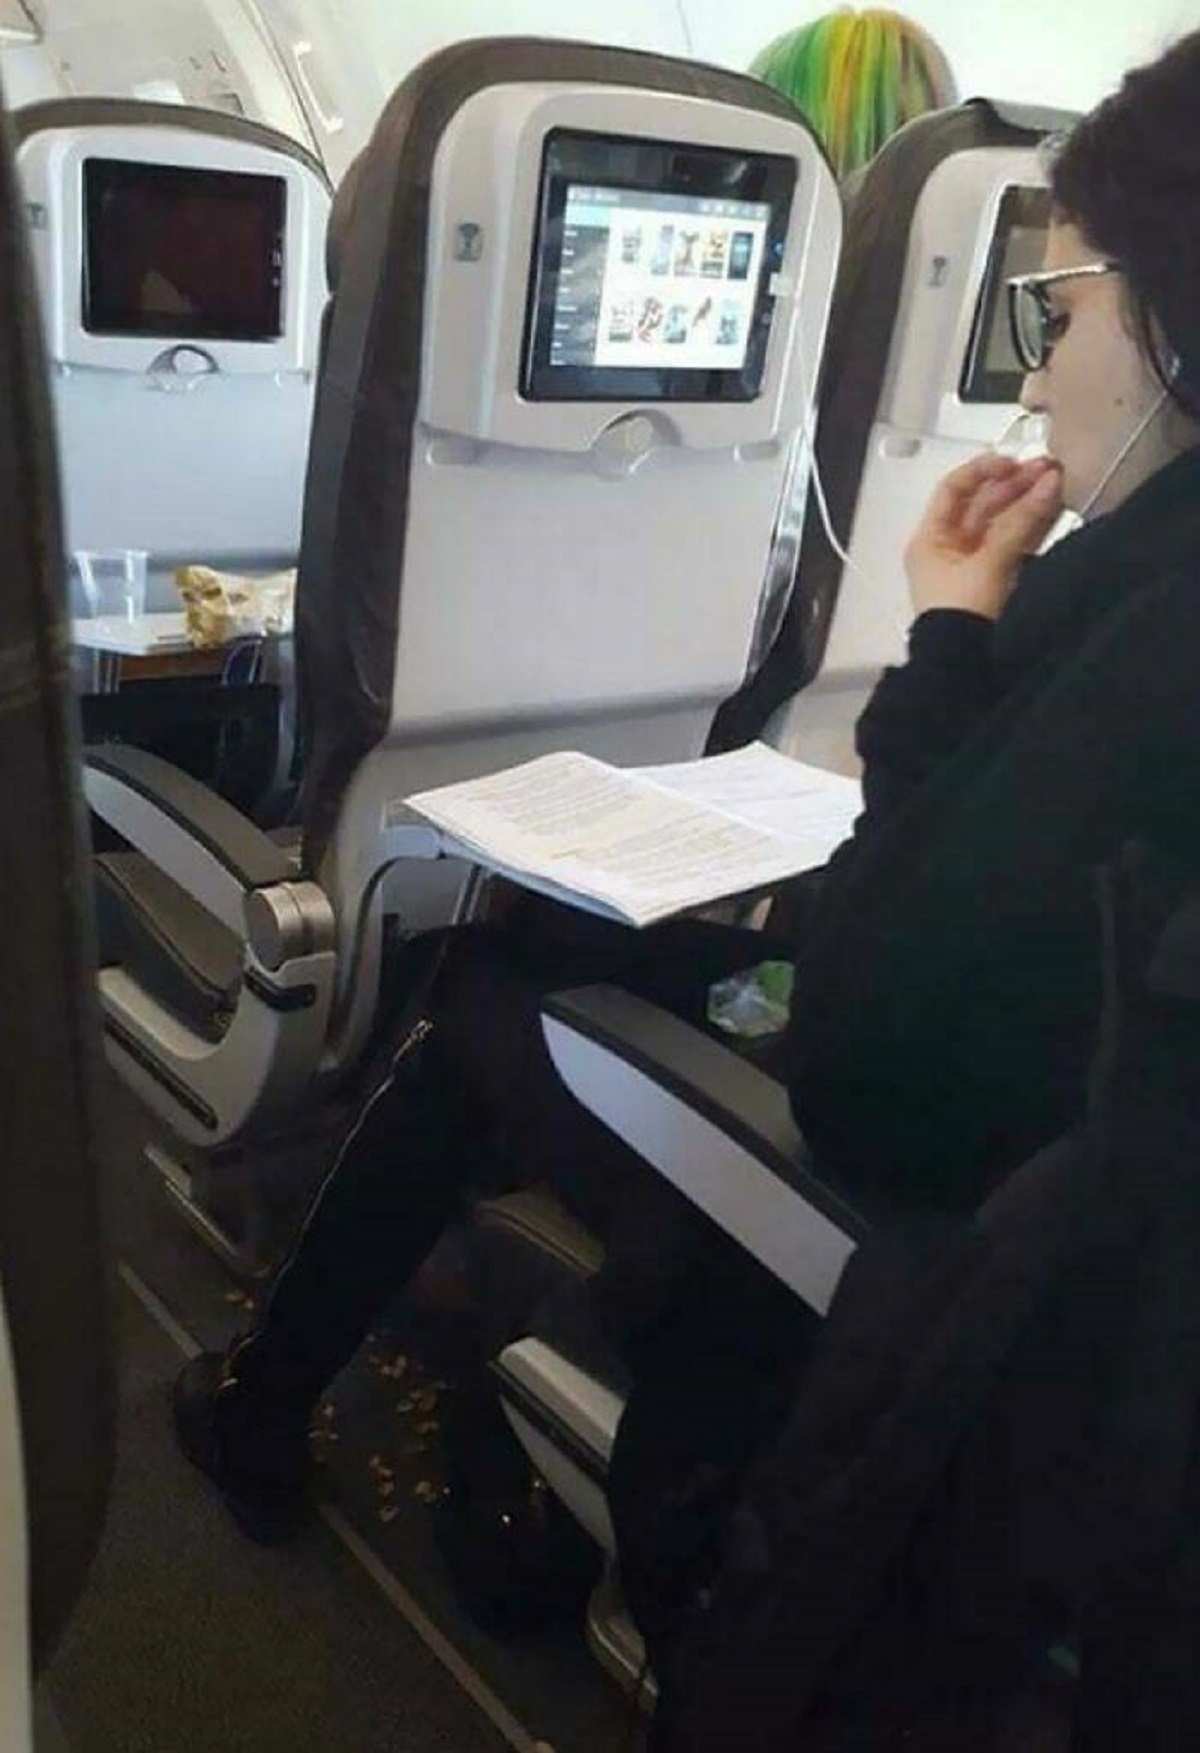 "This Idiot Eating Pistachio Nuts And Throwing The Shells On The Floor Of A Plane"